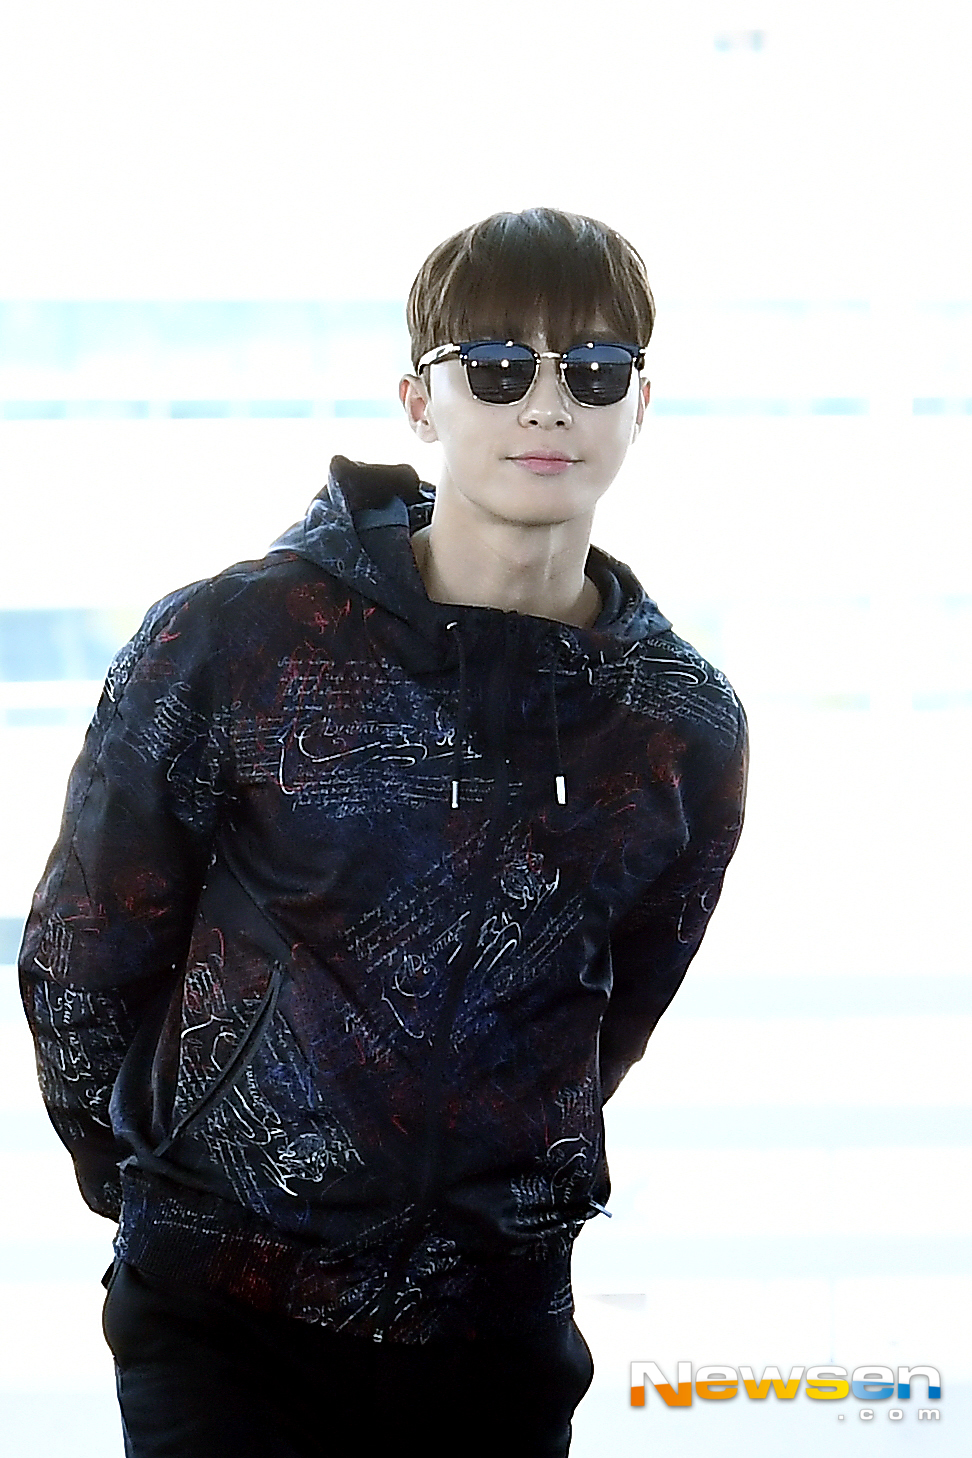 Actor Park Seo-joon left for London on February 7th at Incheon International Airport in Unseo-dong, Jung-gu, Incheon.Actor Park Seo-joon is leaving for London, England, showing off his airport fashion.exponential earthquake